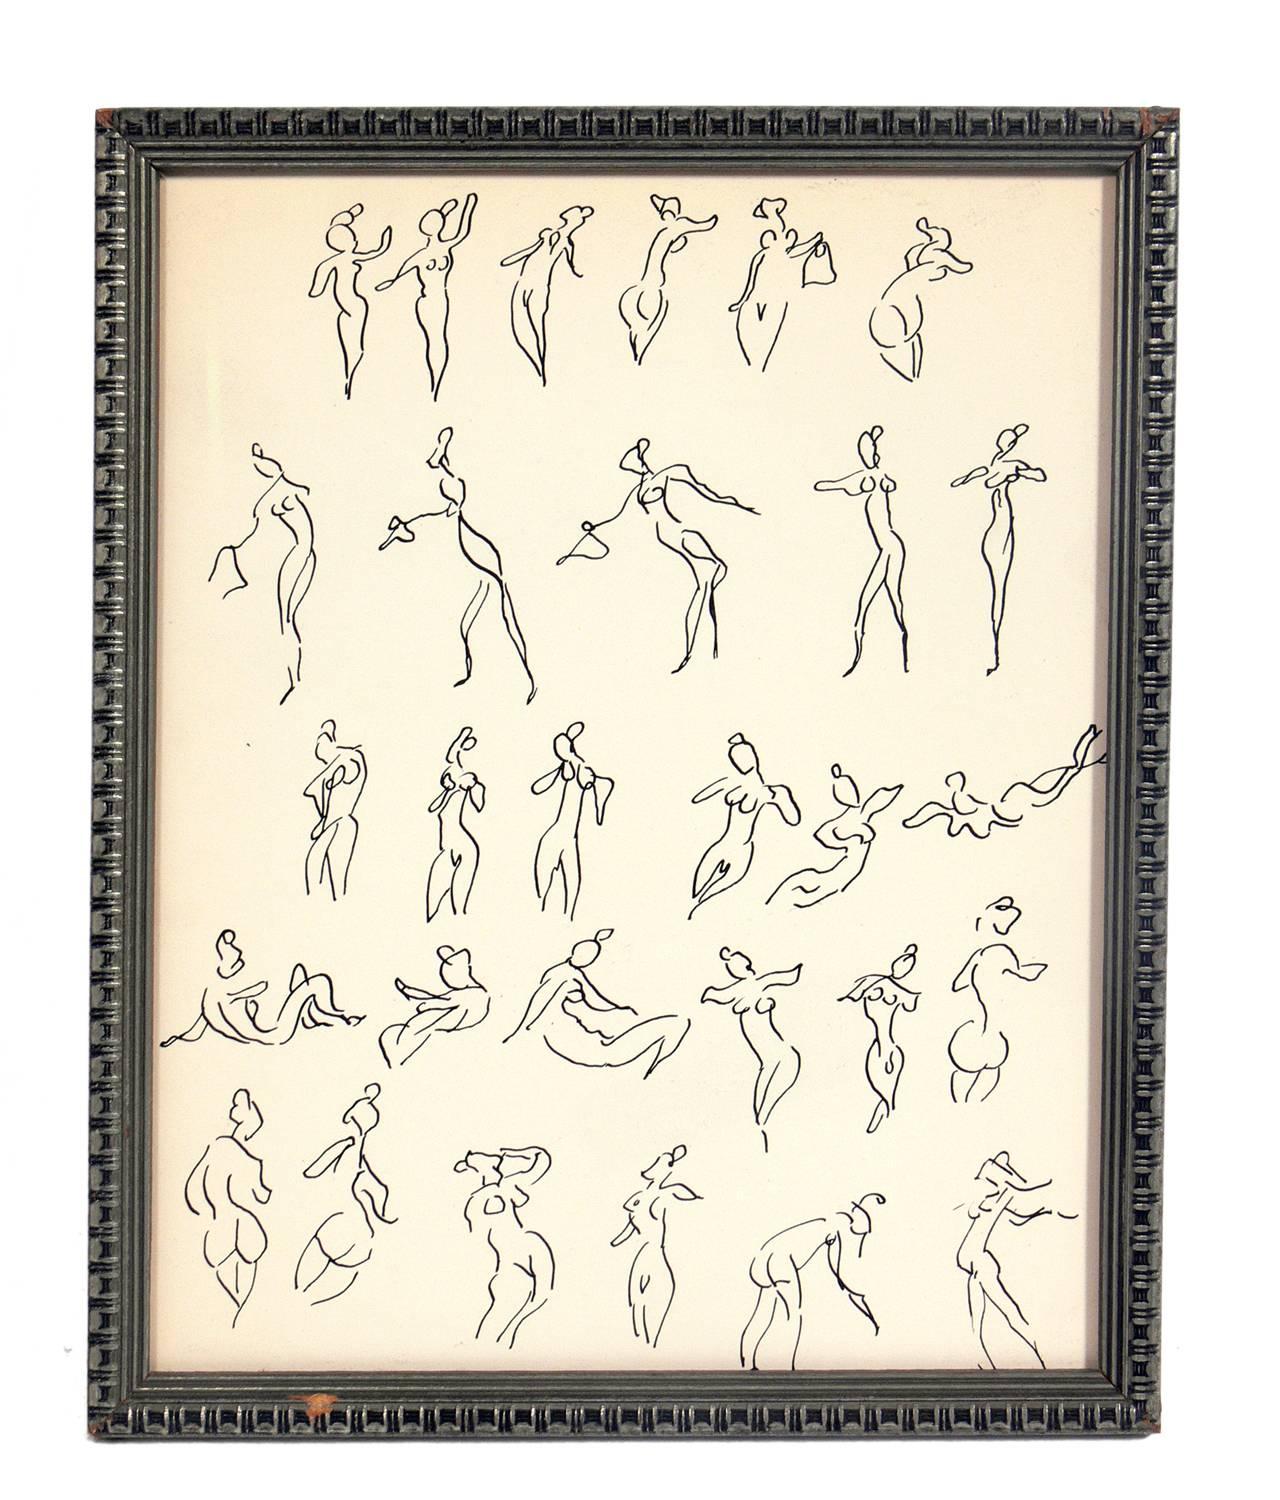 Selection of figural nude drawings, circa 1930s-1950s. Perfect to start or add to your gallery wall. All are priced at $475 each.
They are:
Top row, from left to right:
1) Figural line drawings, by Miriam Kubach, circa 1950s. It measures 11